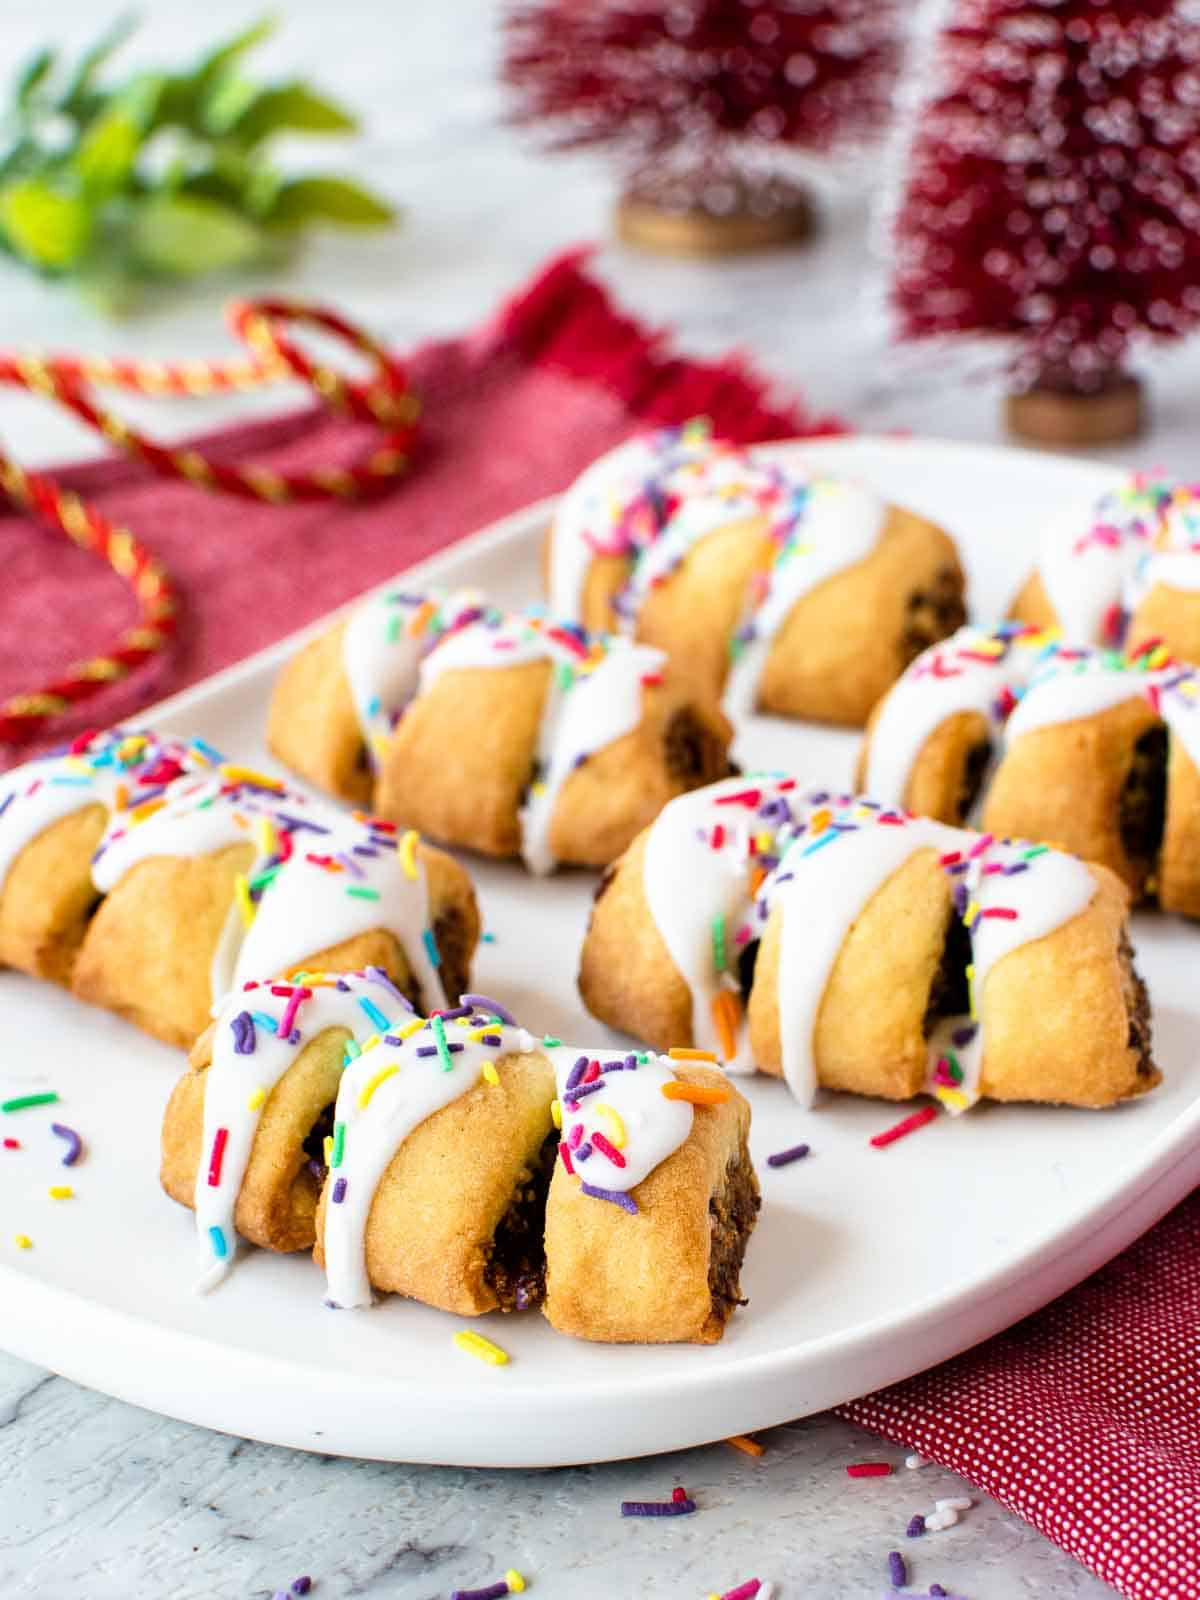 seven cuccidati cookies with a dark fruit filling drizzled with white icing and colored sprinkles on a white oblong plate.